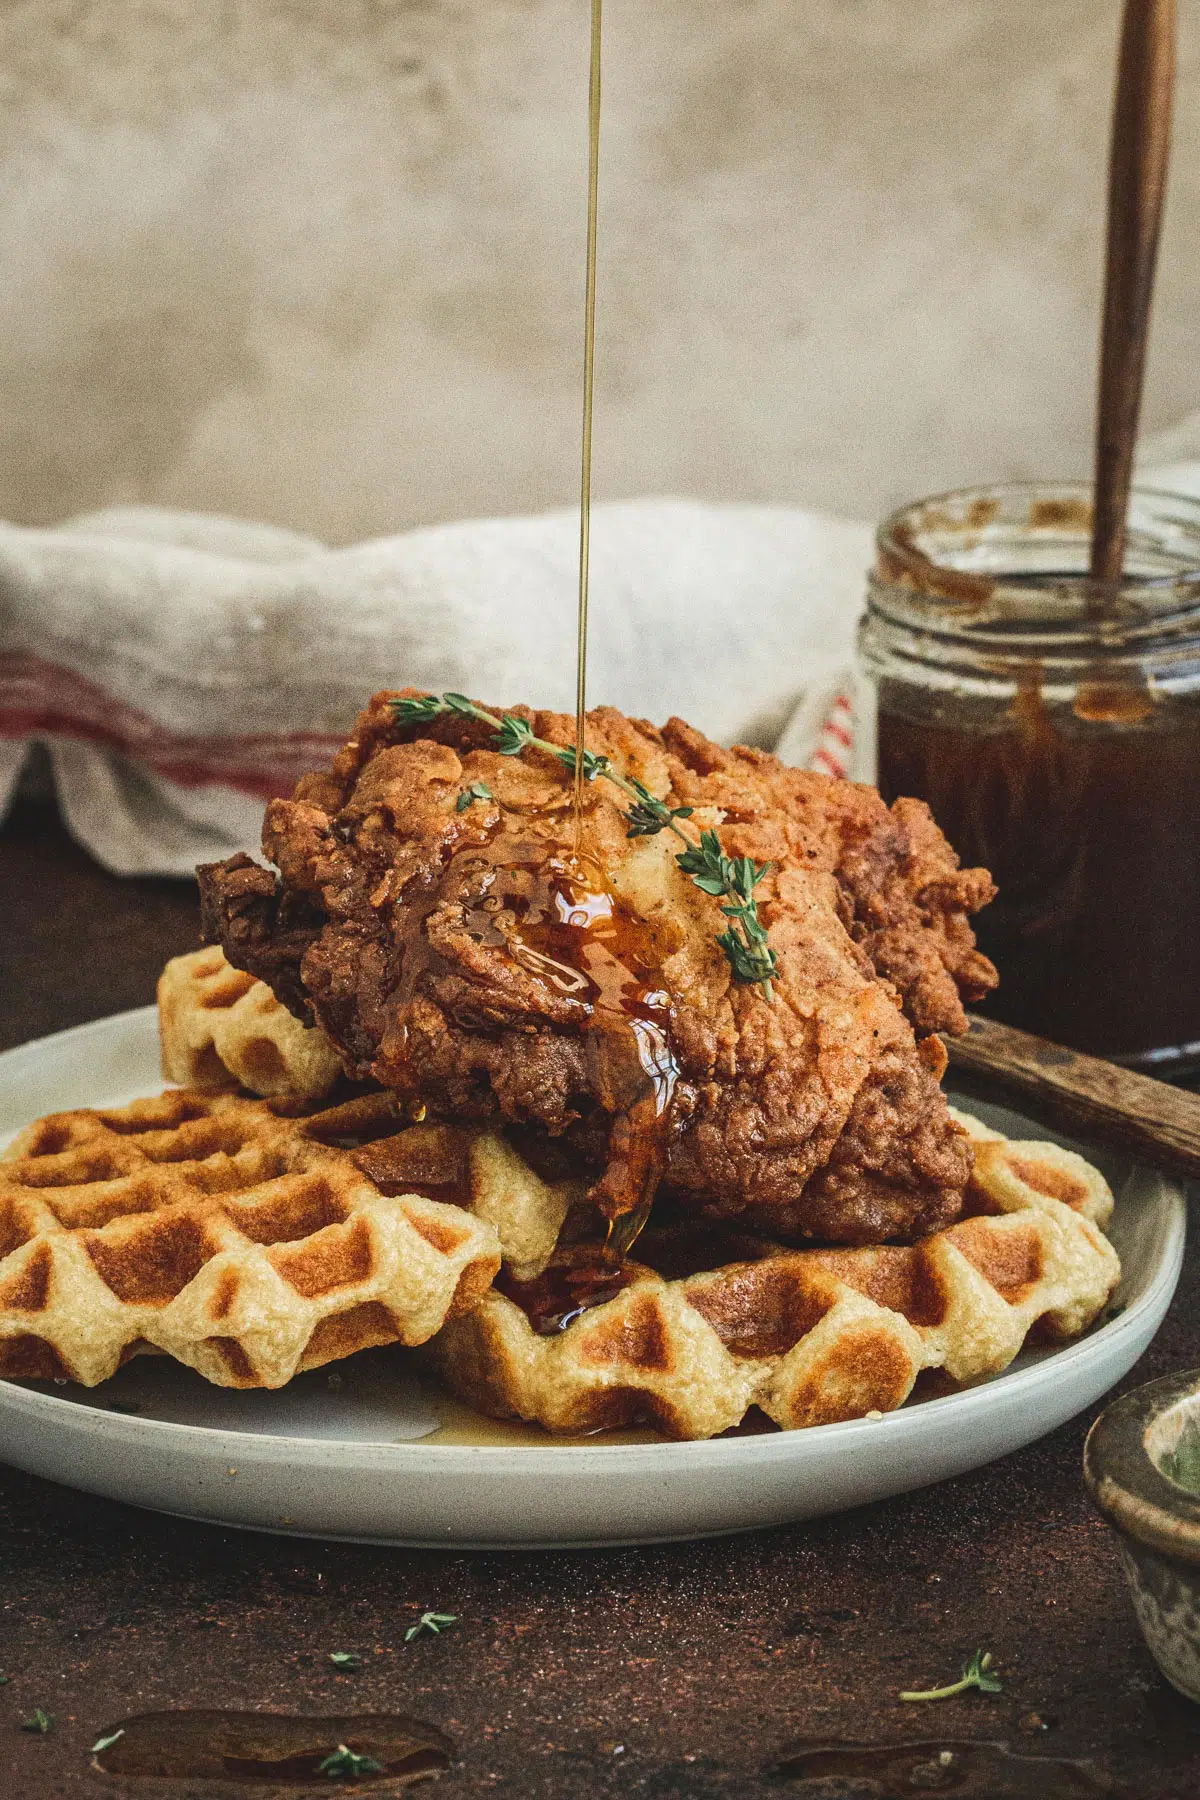 Syrup drizzling on fried chicken and waffles on a white plate.